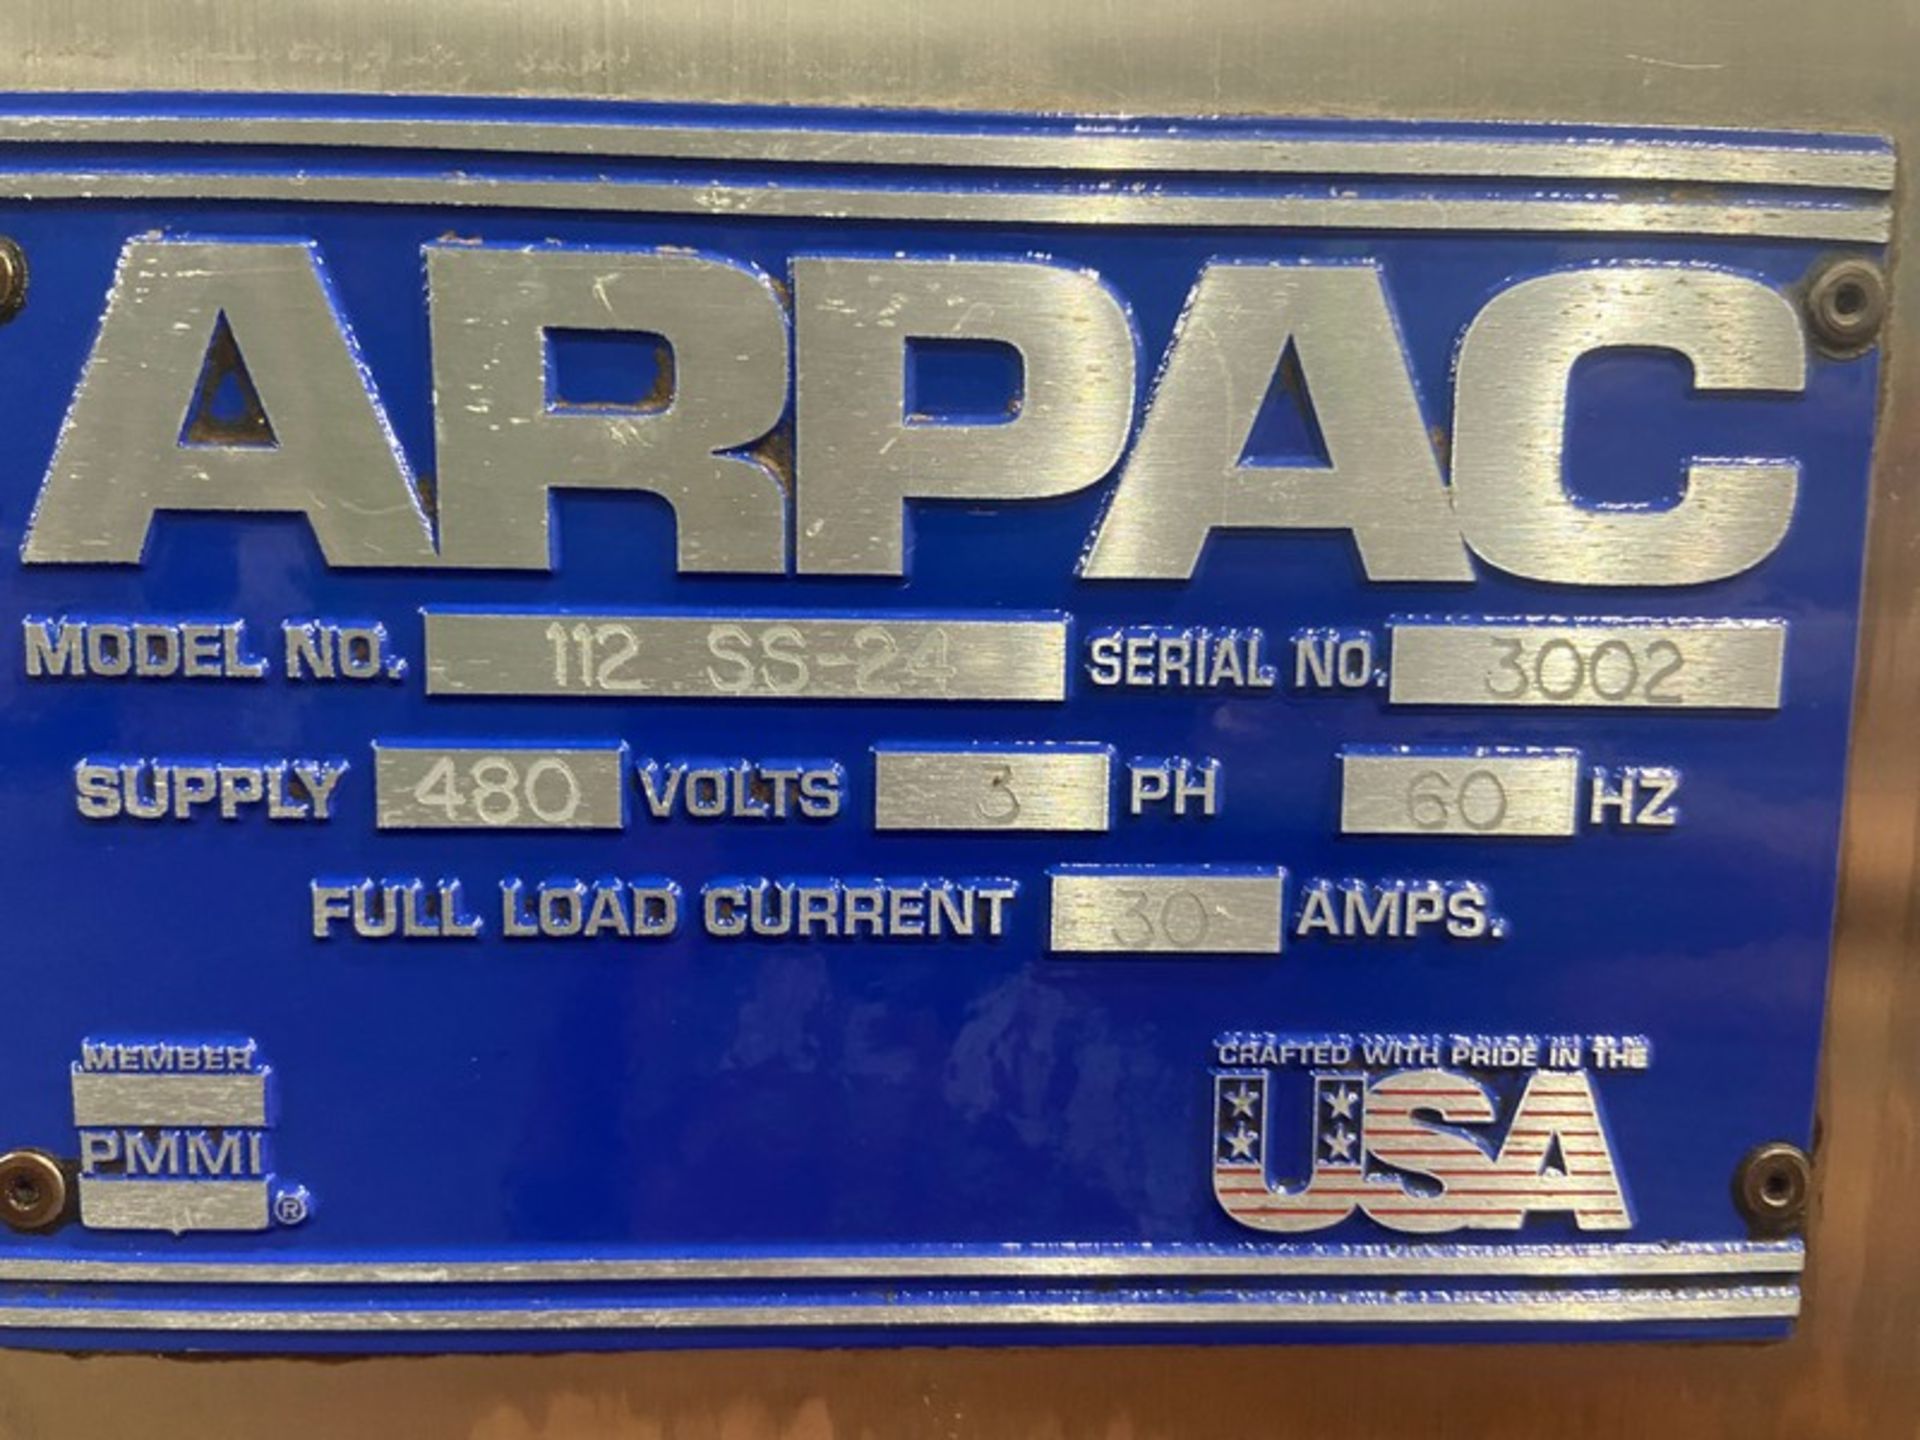 ARPAC S/S Shrink Bundler, M/N 112 SS-24, S/N 3002, 480 Volts, 3 Phase, with Aprox. 15" W DIscharge - Image 10 of 14